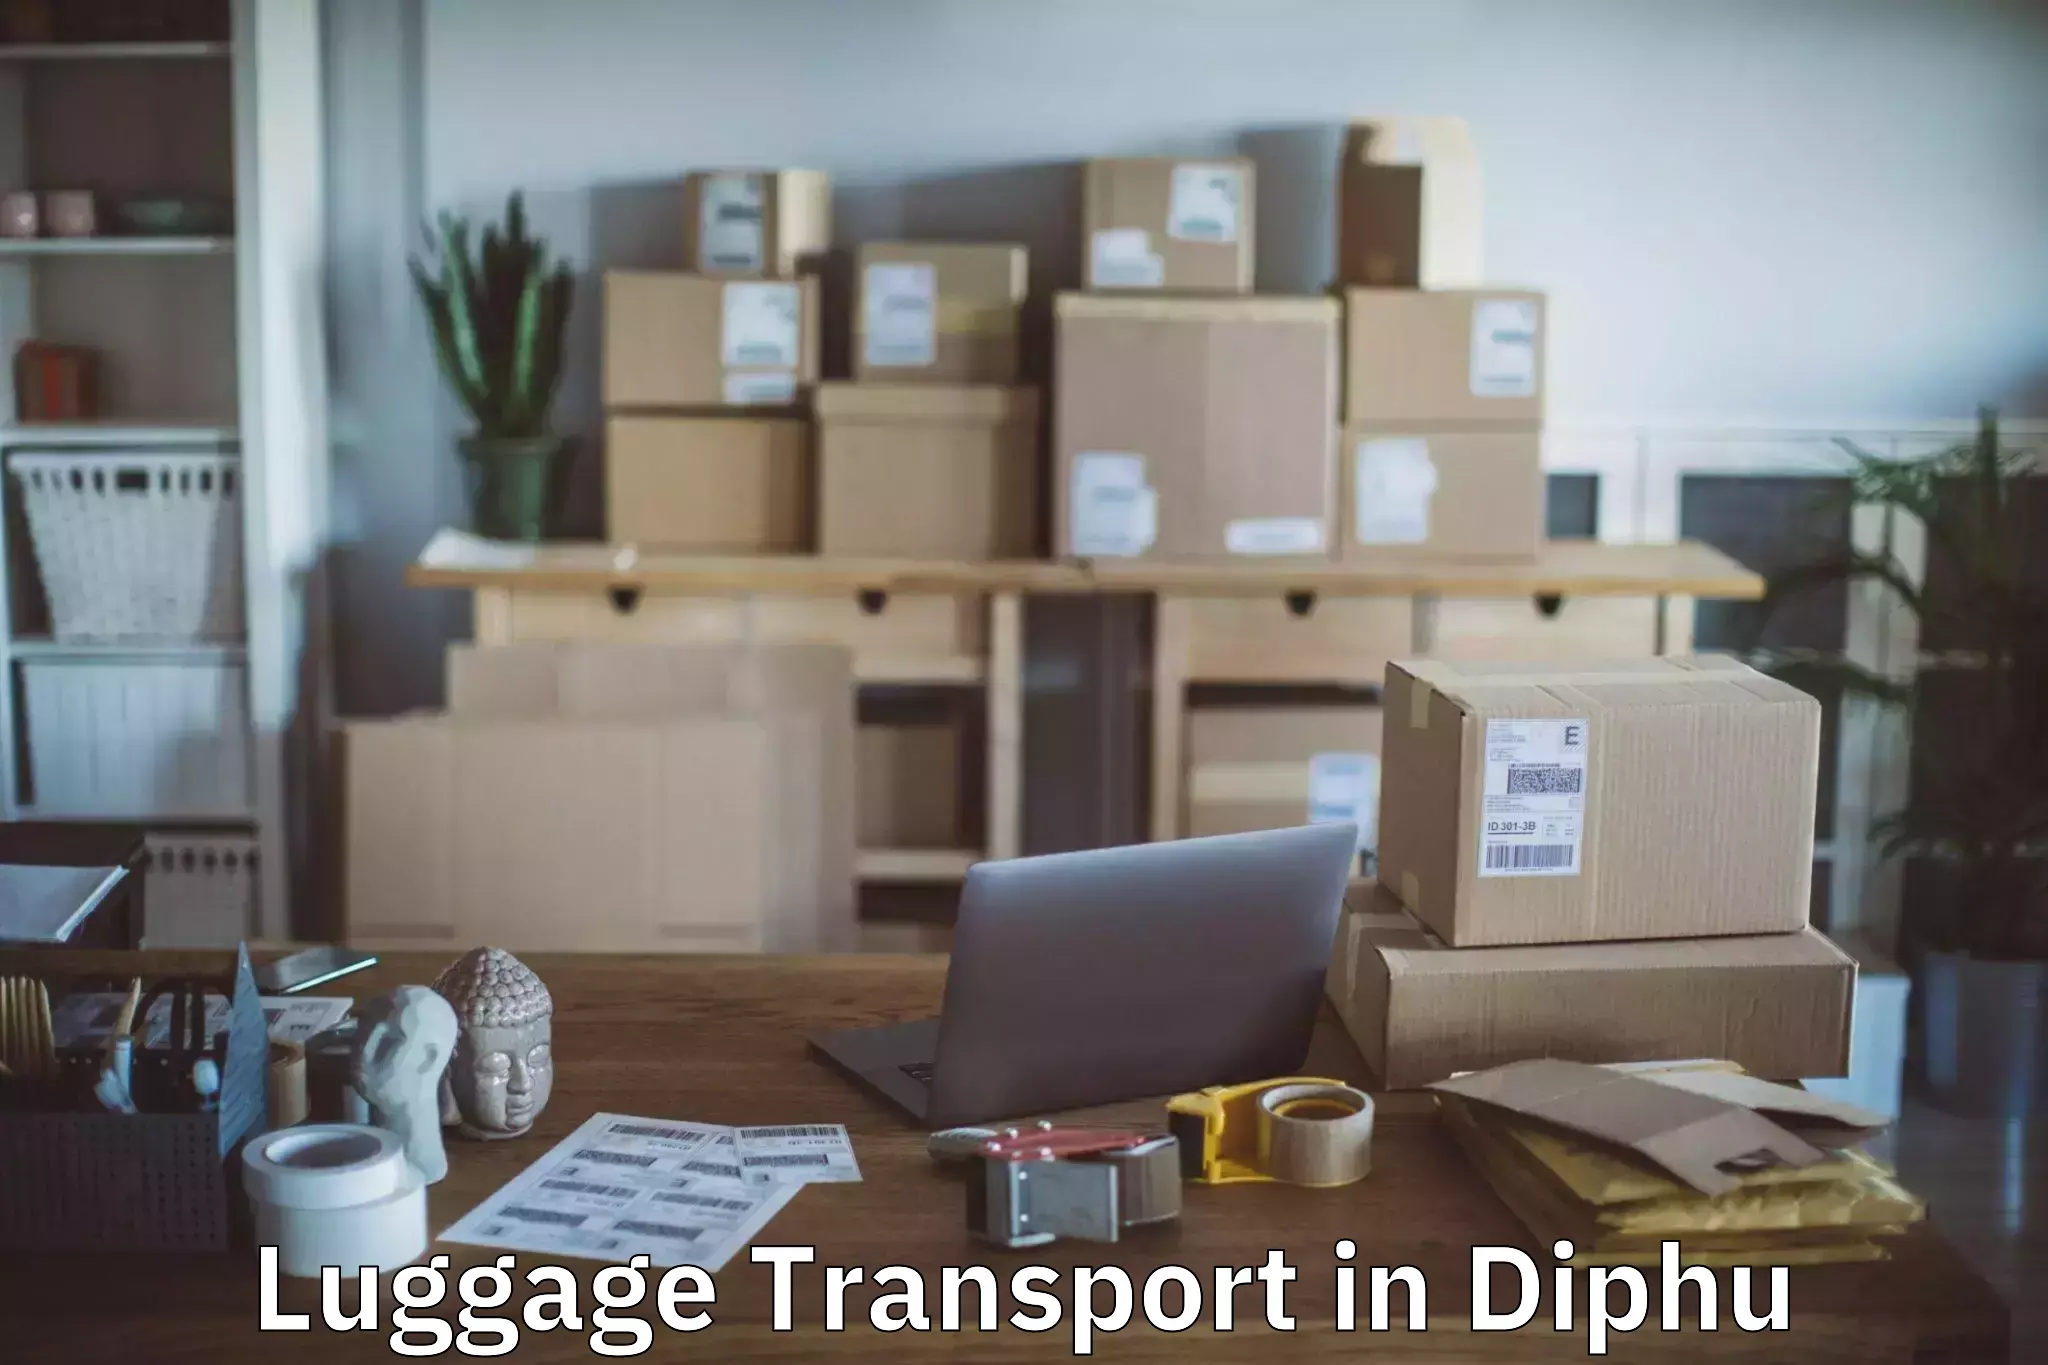 Luggage shipment tracking in Diphu